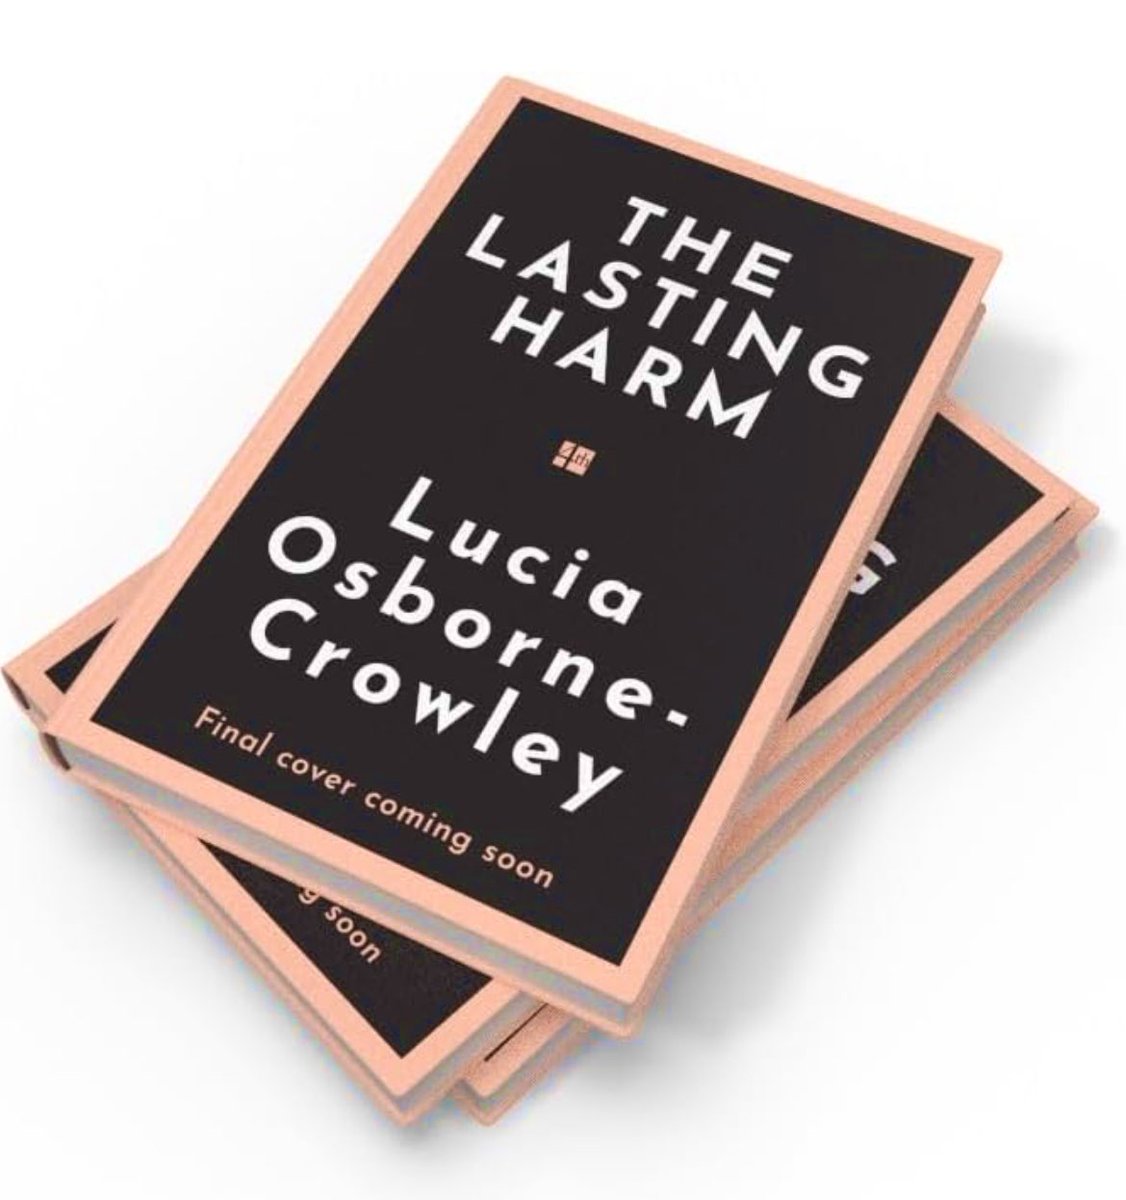 Keep your eyes peeled! Final cover, pre-order link and pub date coming soon for The Lasting Harm, my new book about the survivors of Jeffrey Epstein and Ghislaine Maxwell. Featuring some early endorsements from some of my all-time favourite authors. I feel so lucky. More soon!